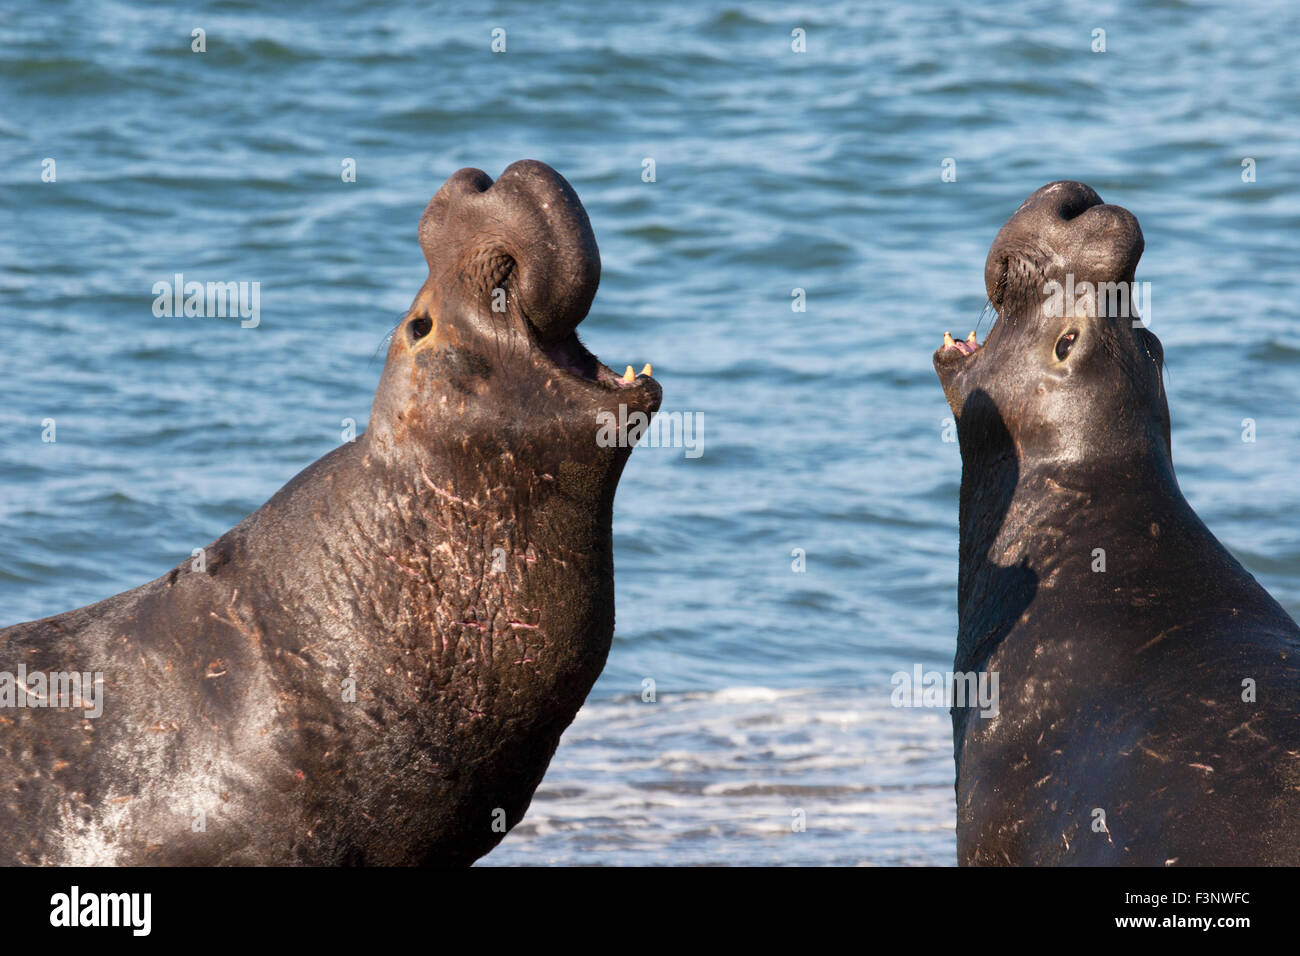 Northern Elephant Seal (Mirounga angustirostris) dominant males bellowing at each other in the Pacific Ocean. Stock Photo